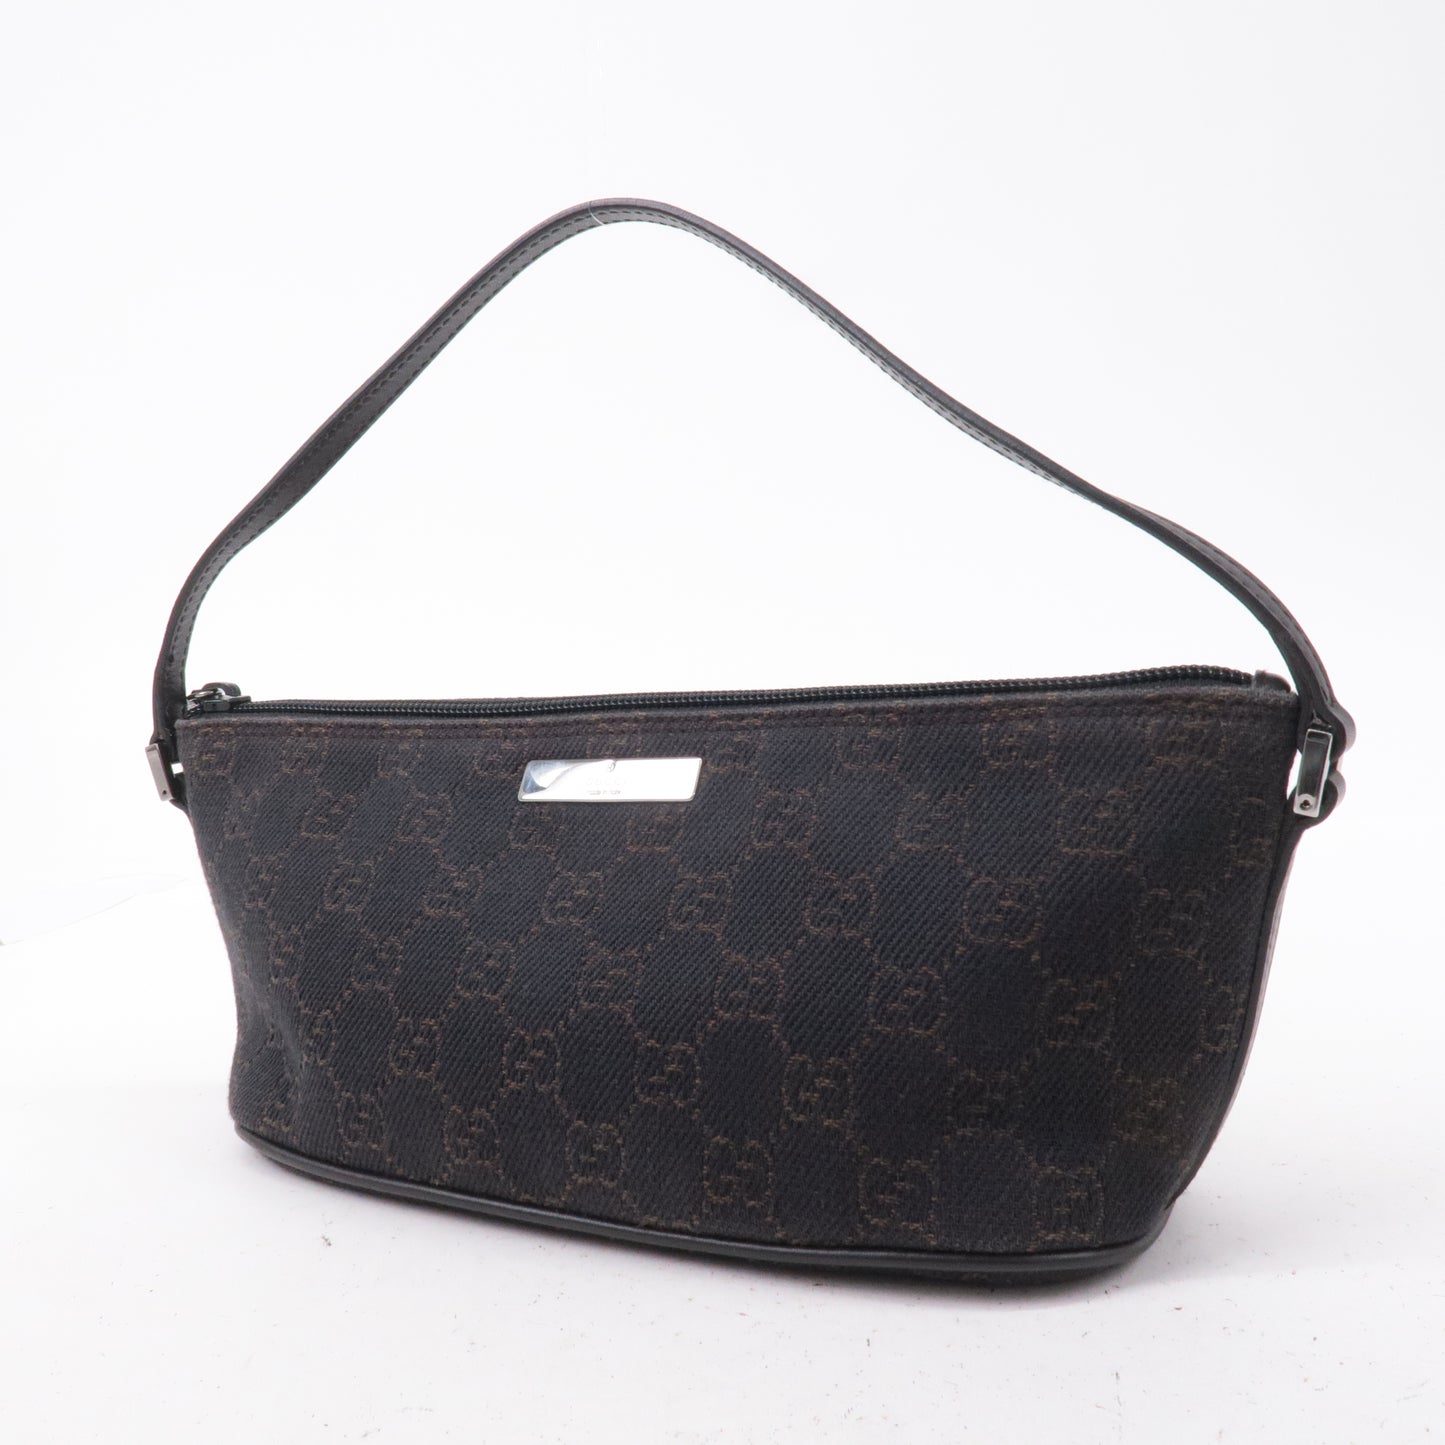 GUCCI Boat Bag GG Canvas Leather Hand Bag Dark Brown 07198